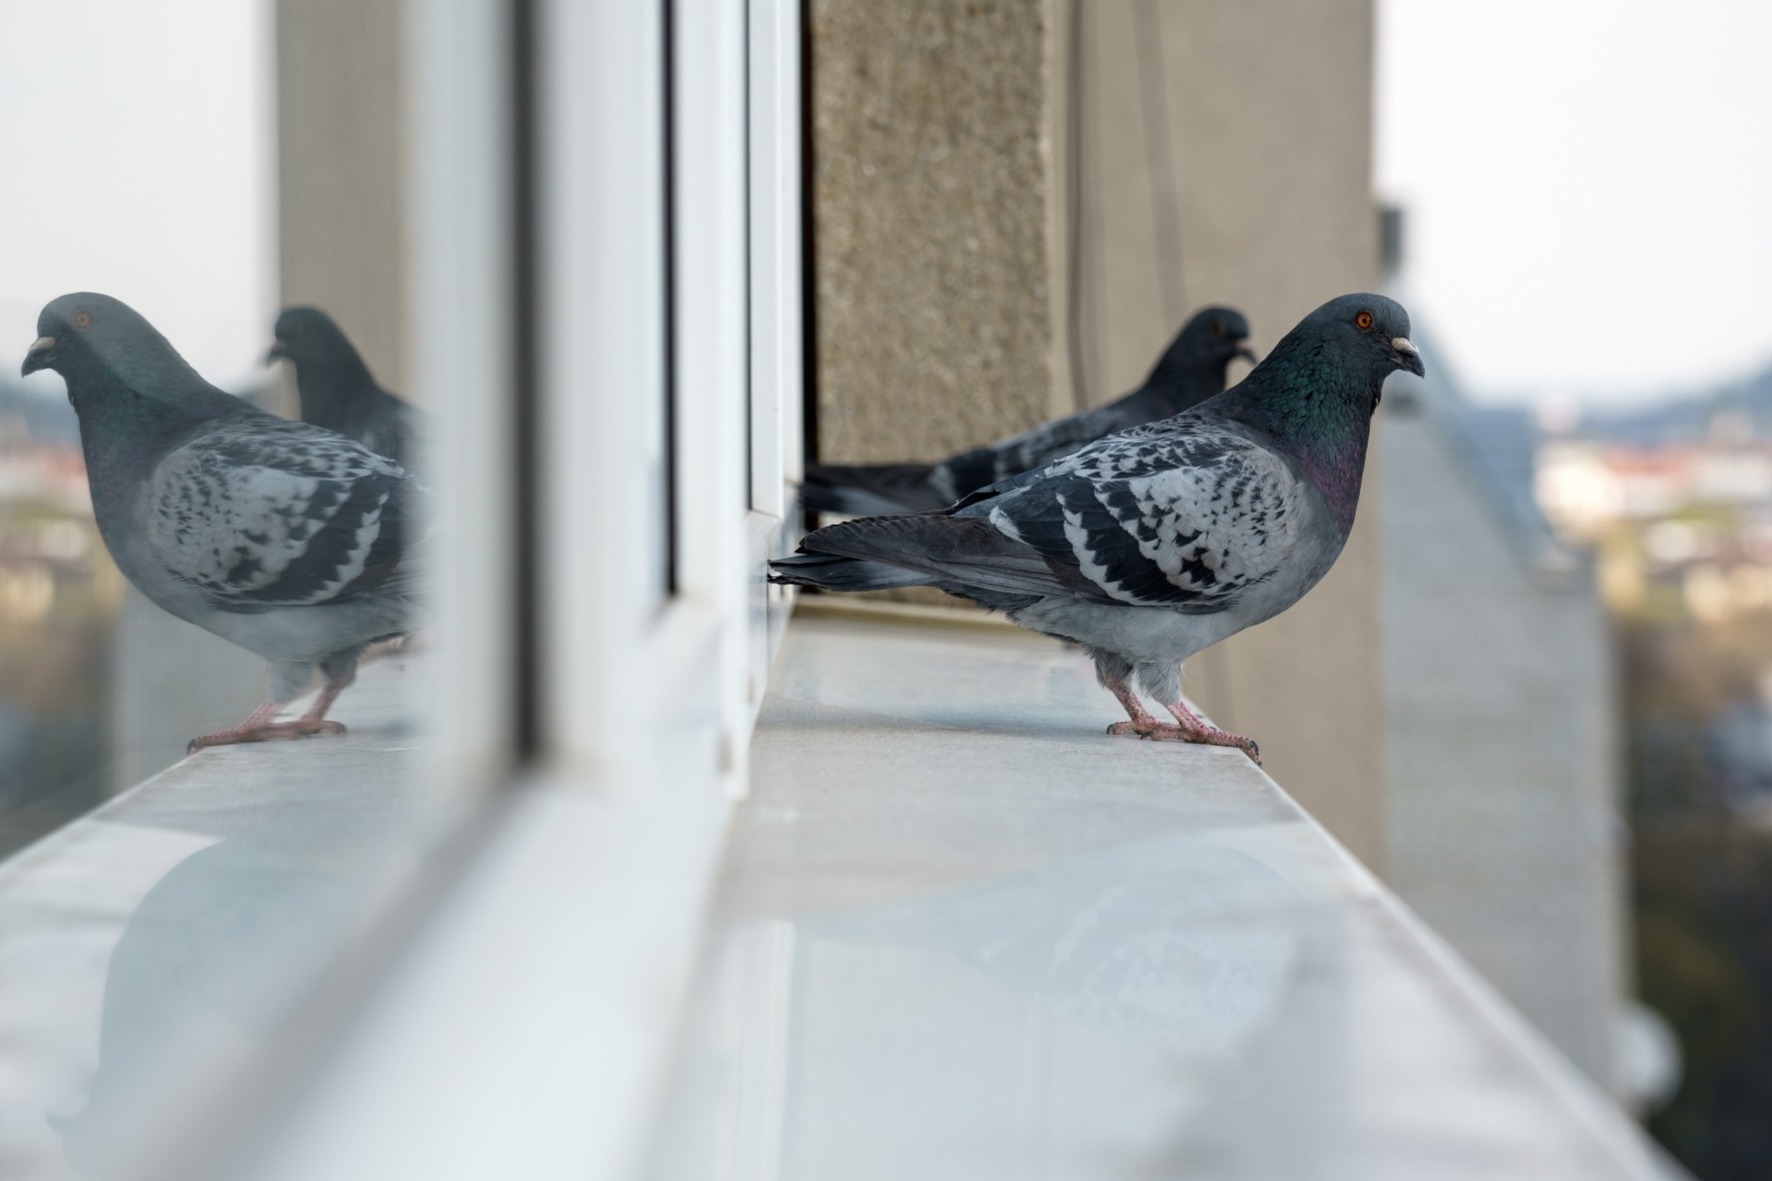 two pigeons on a window sill